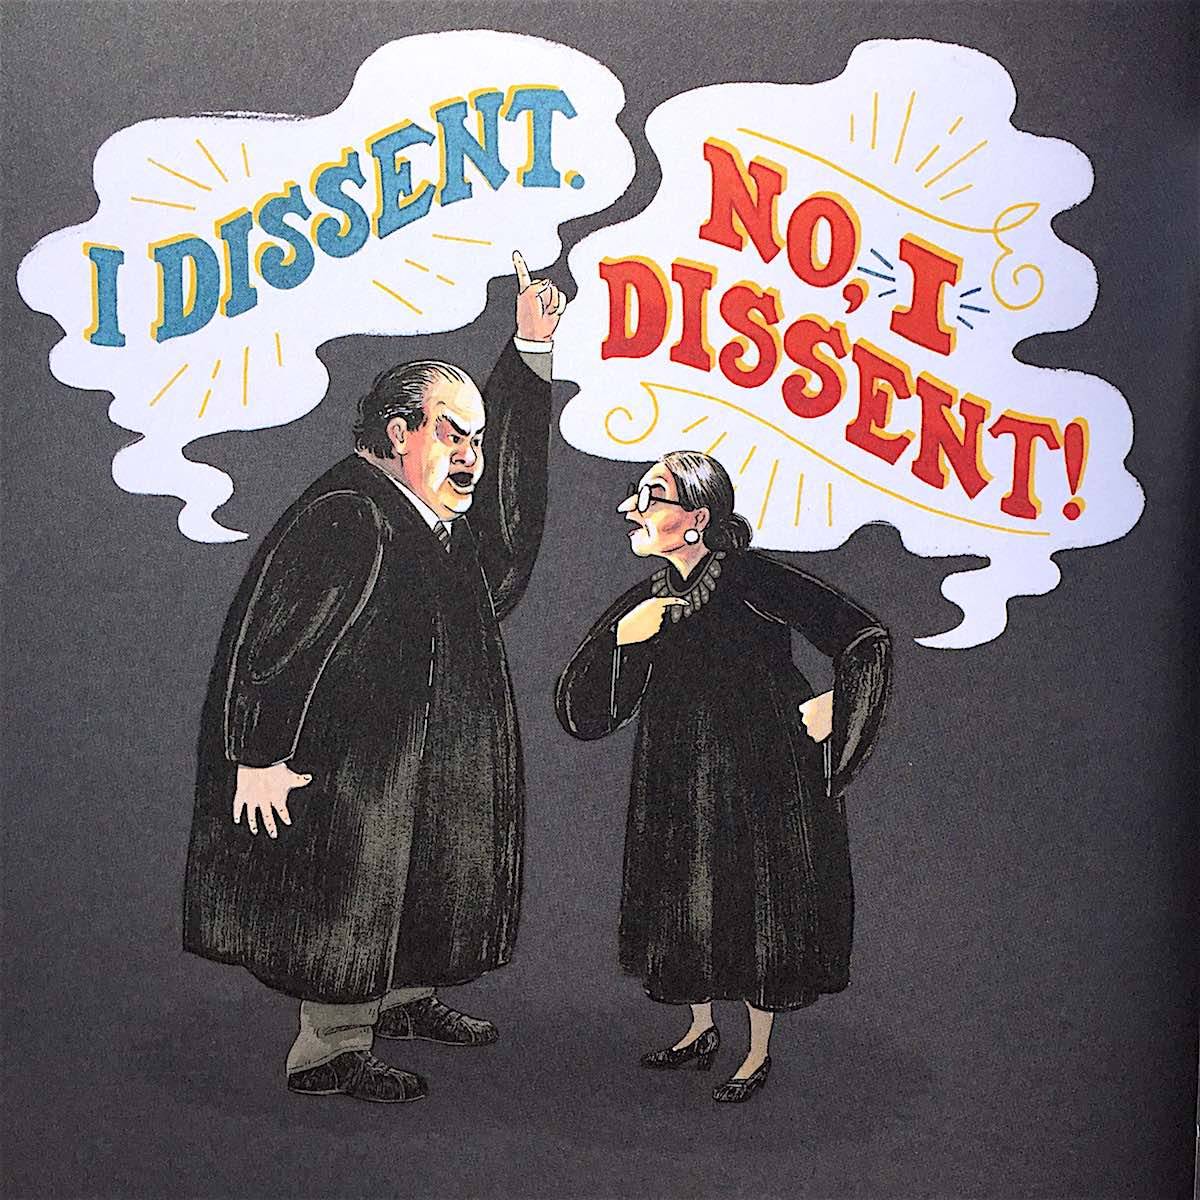 I Dissent by Debbie Levy